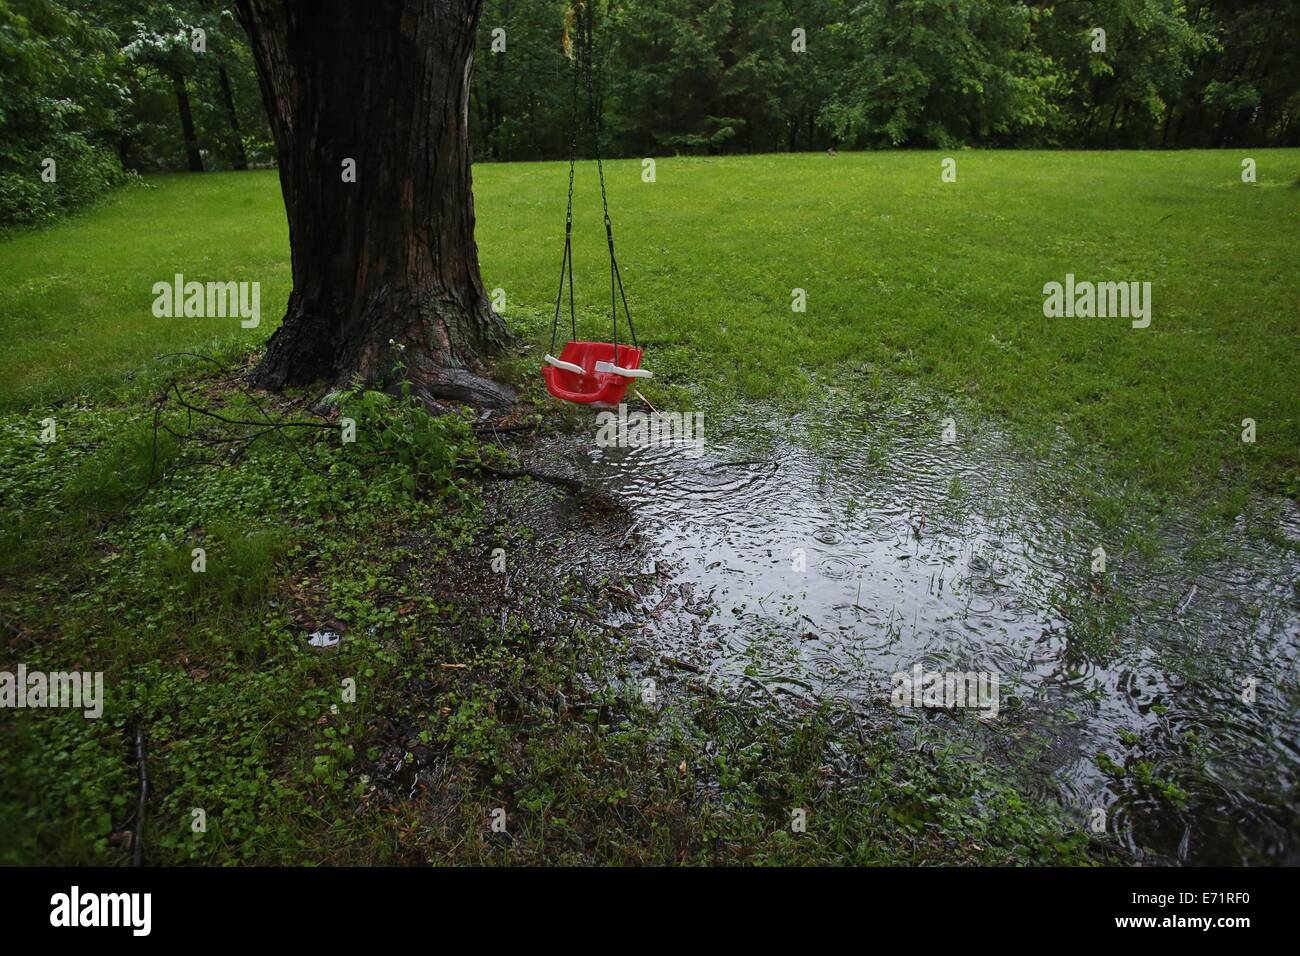 A child's swing hanging from a tree over a puddle. Stock Photo